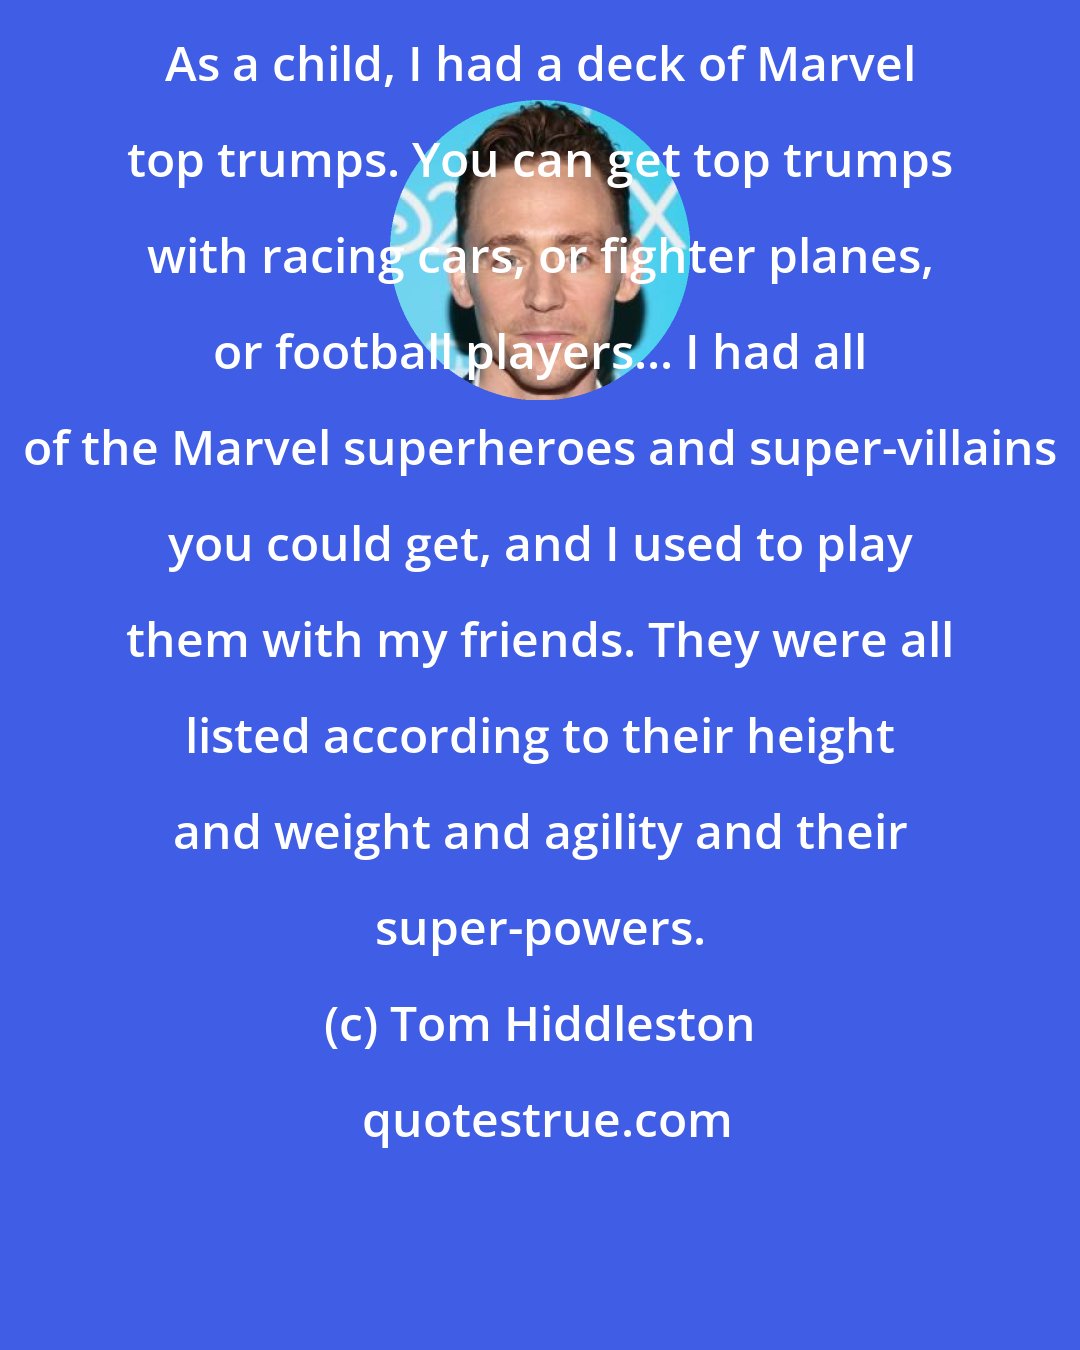 Tom Hiddleston: As a child, I had a deck of Marvel top trumps. You can get top trumps with racing cars, or fighter planes, or football players... I had all of the Marvel superheroes and super-villains you could get, and I used to play them with my friends. They were all listed according to their height and weight and agility and their super-powers.